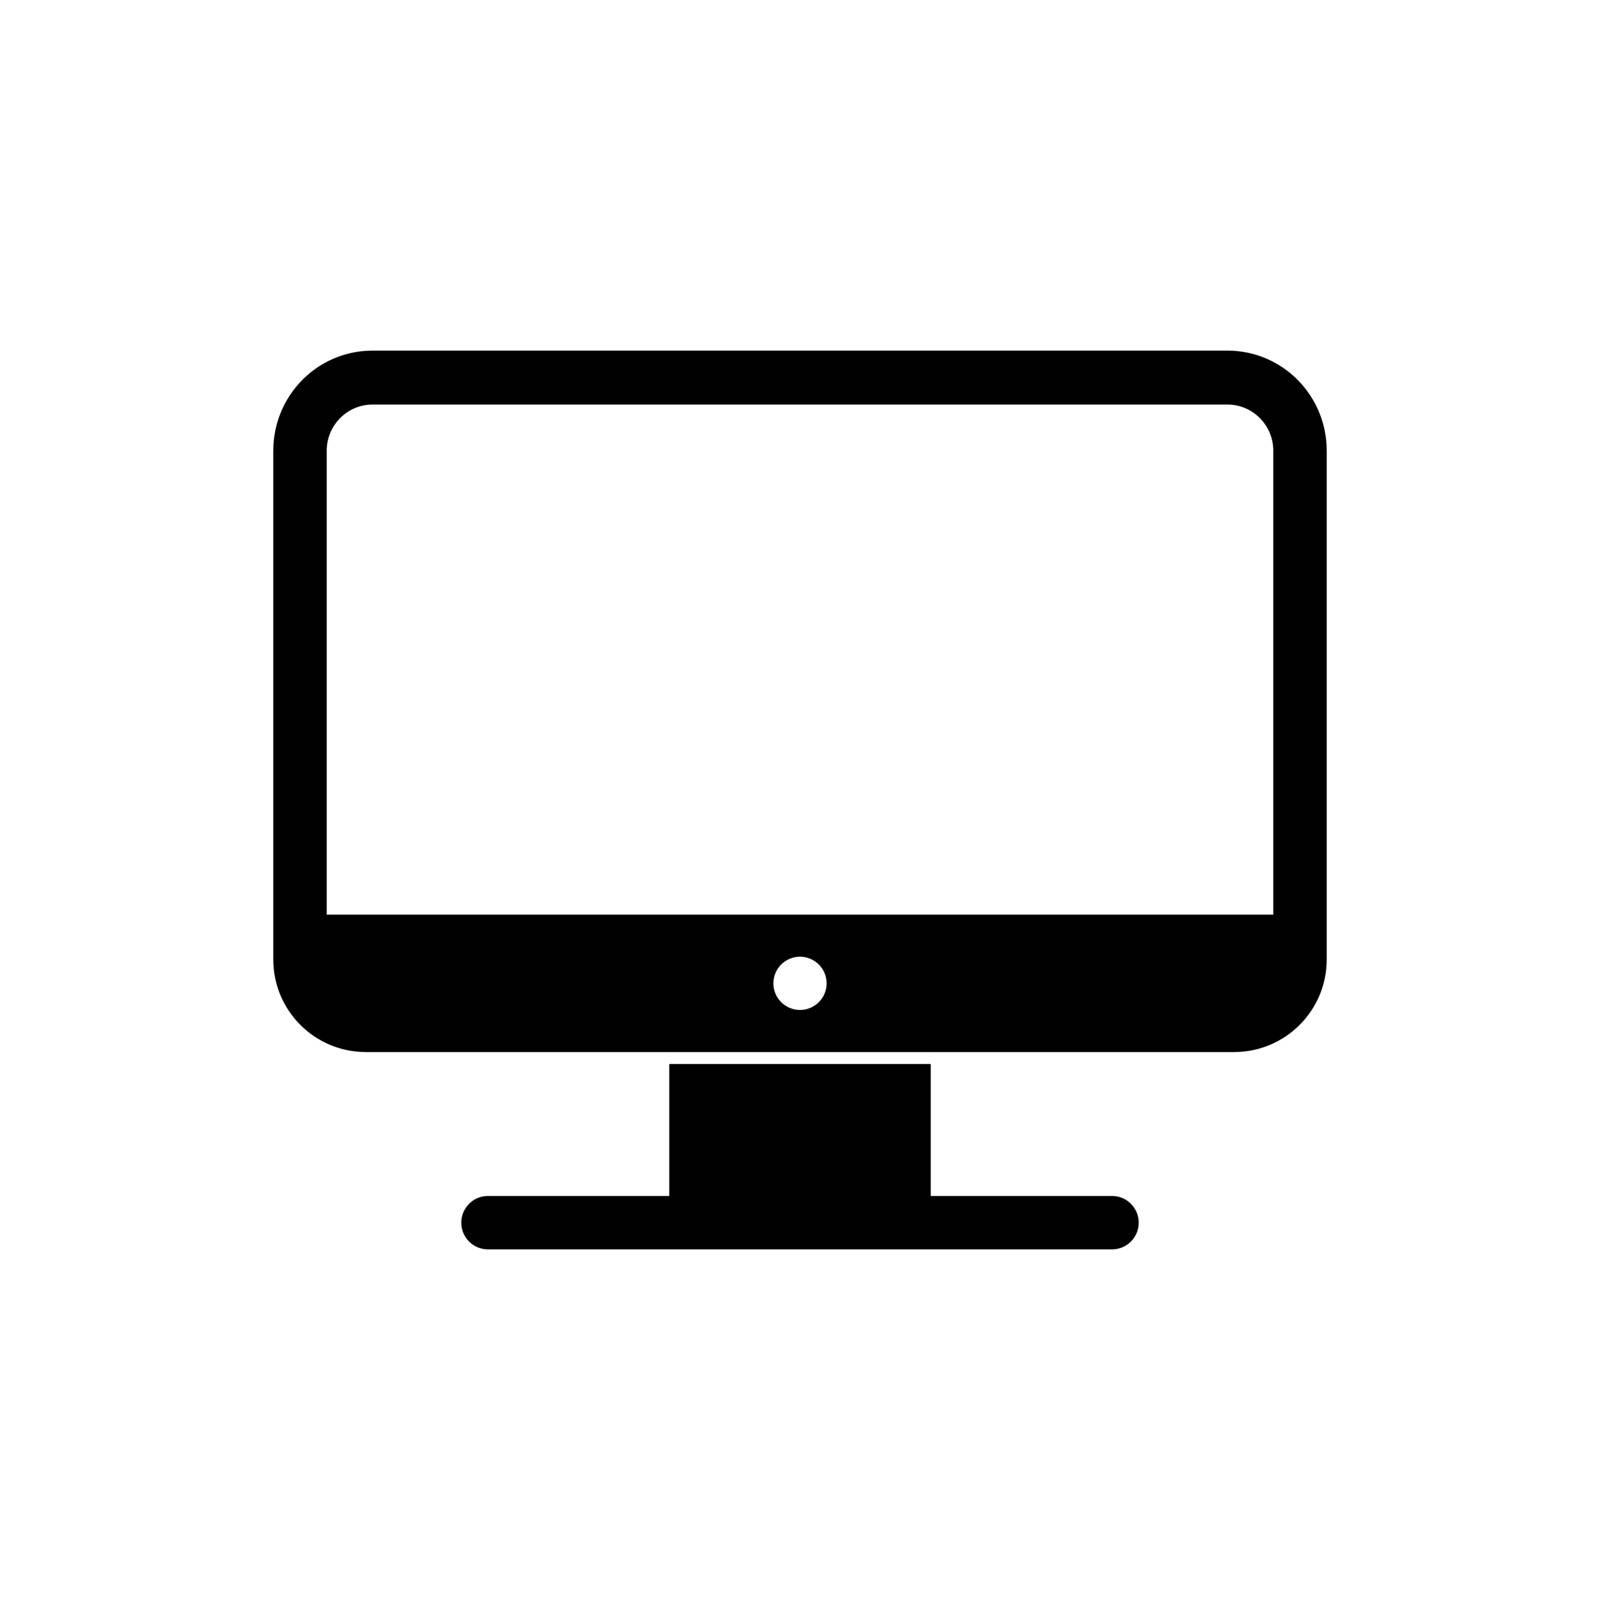 Desktop computer icon. Computer screen symbol isolated on white background. Desktop computer sign in flat style. Vector illustration for web site, mobile application.